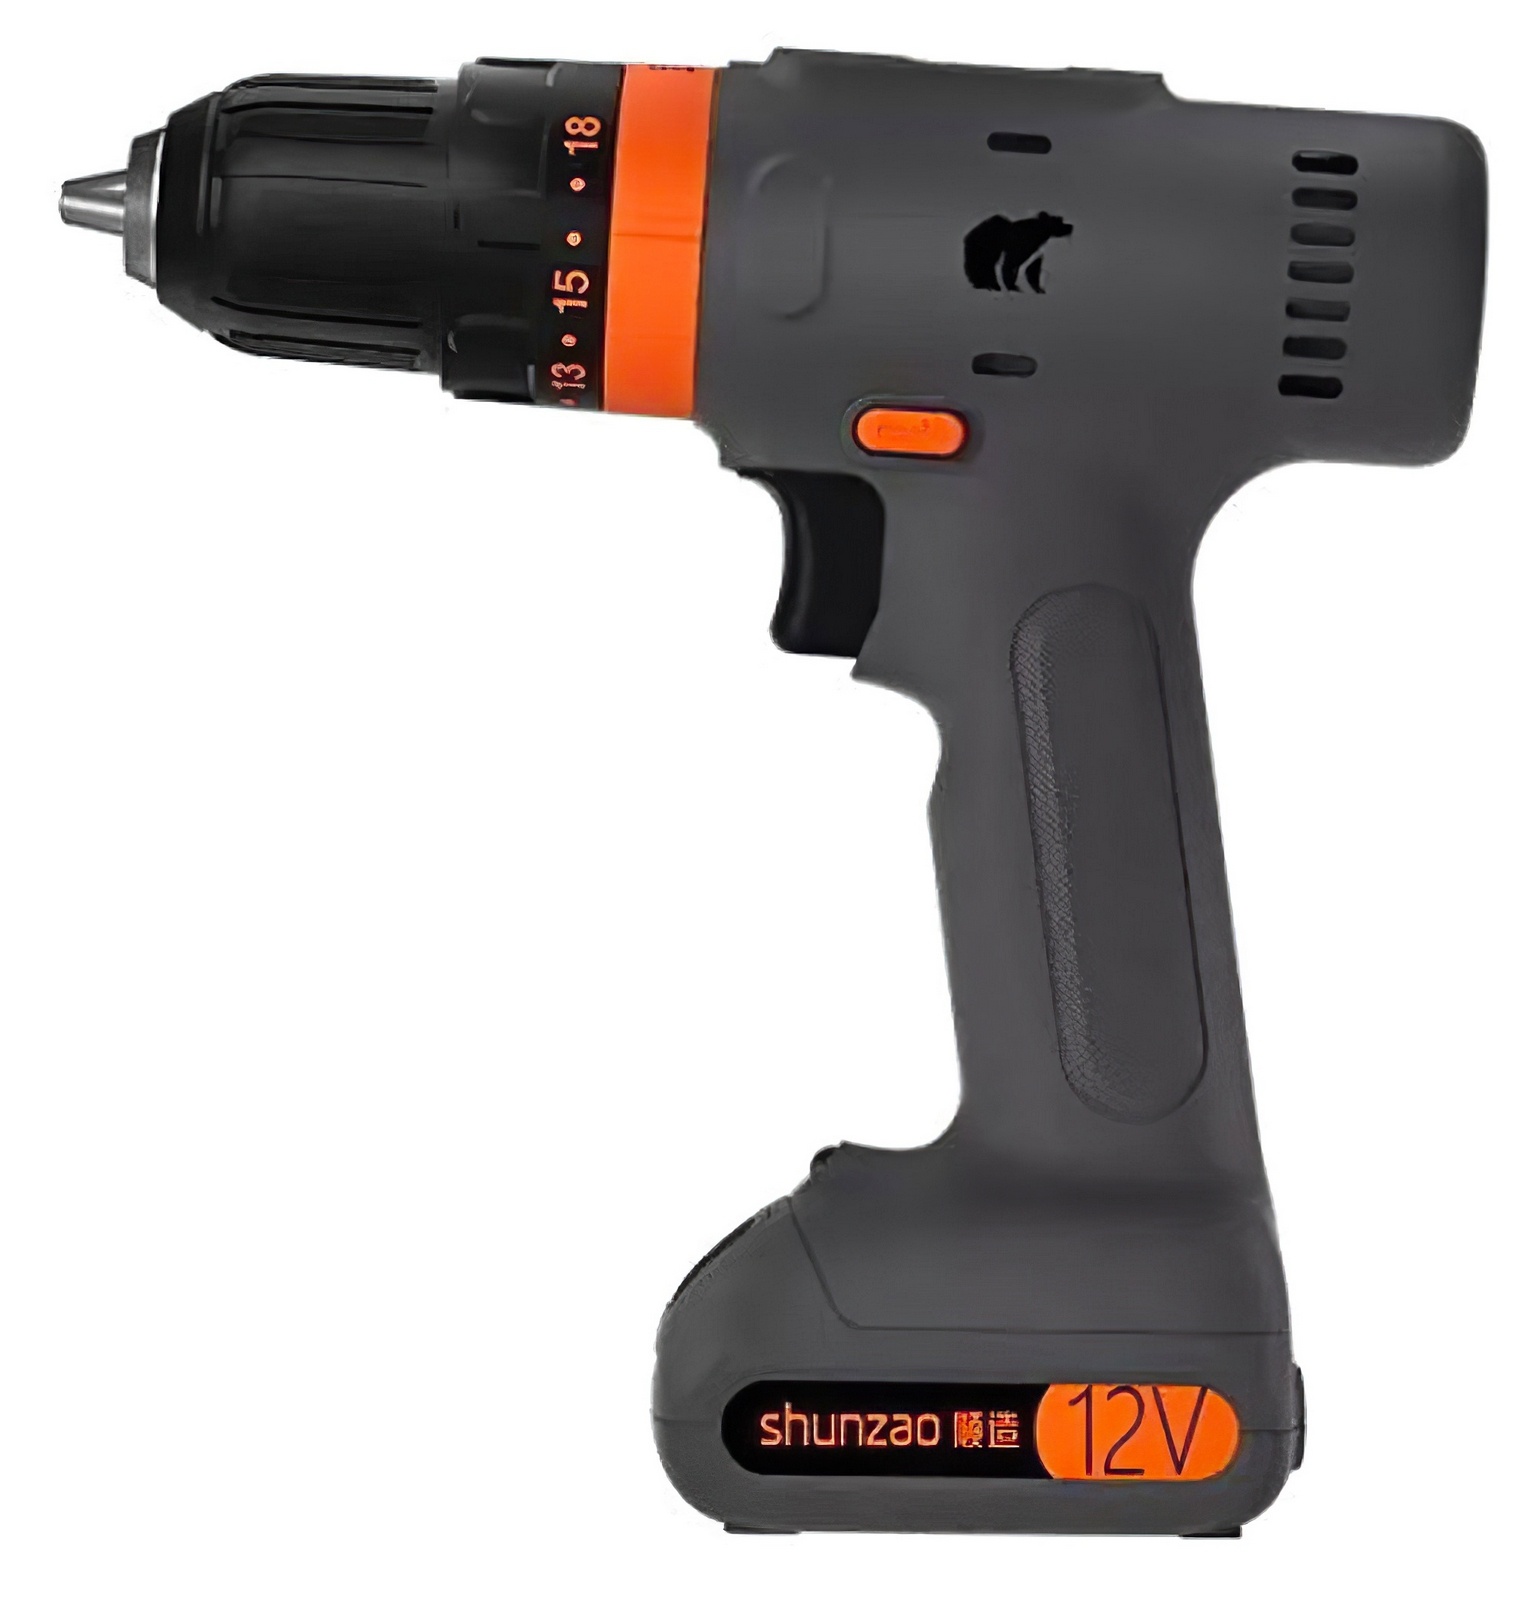 Xiaomi Shunzao Downstream Double Speed Impact Drill 12V КАРКАМ